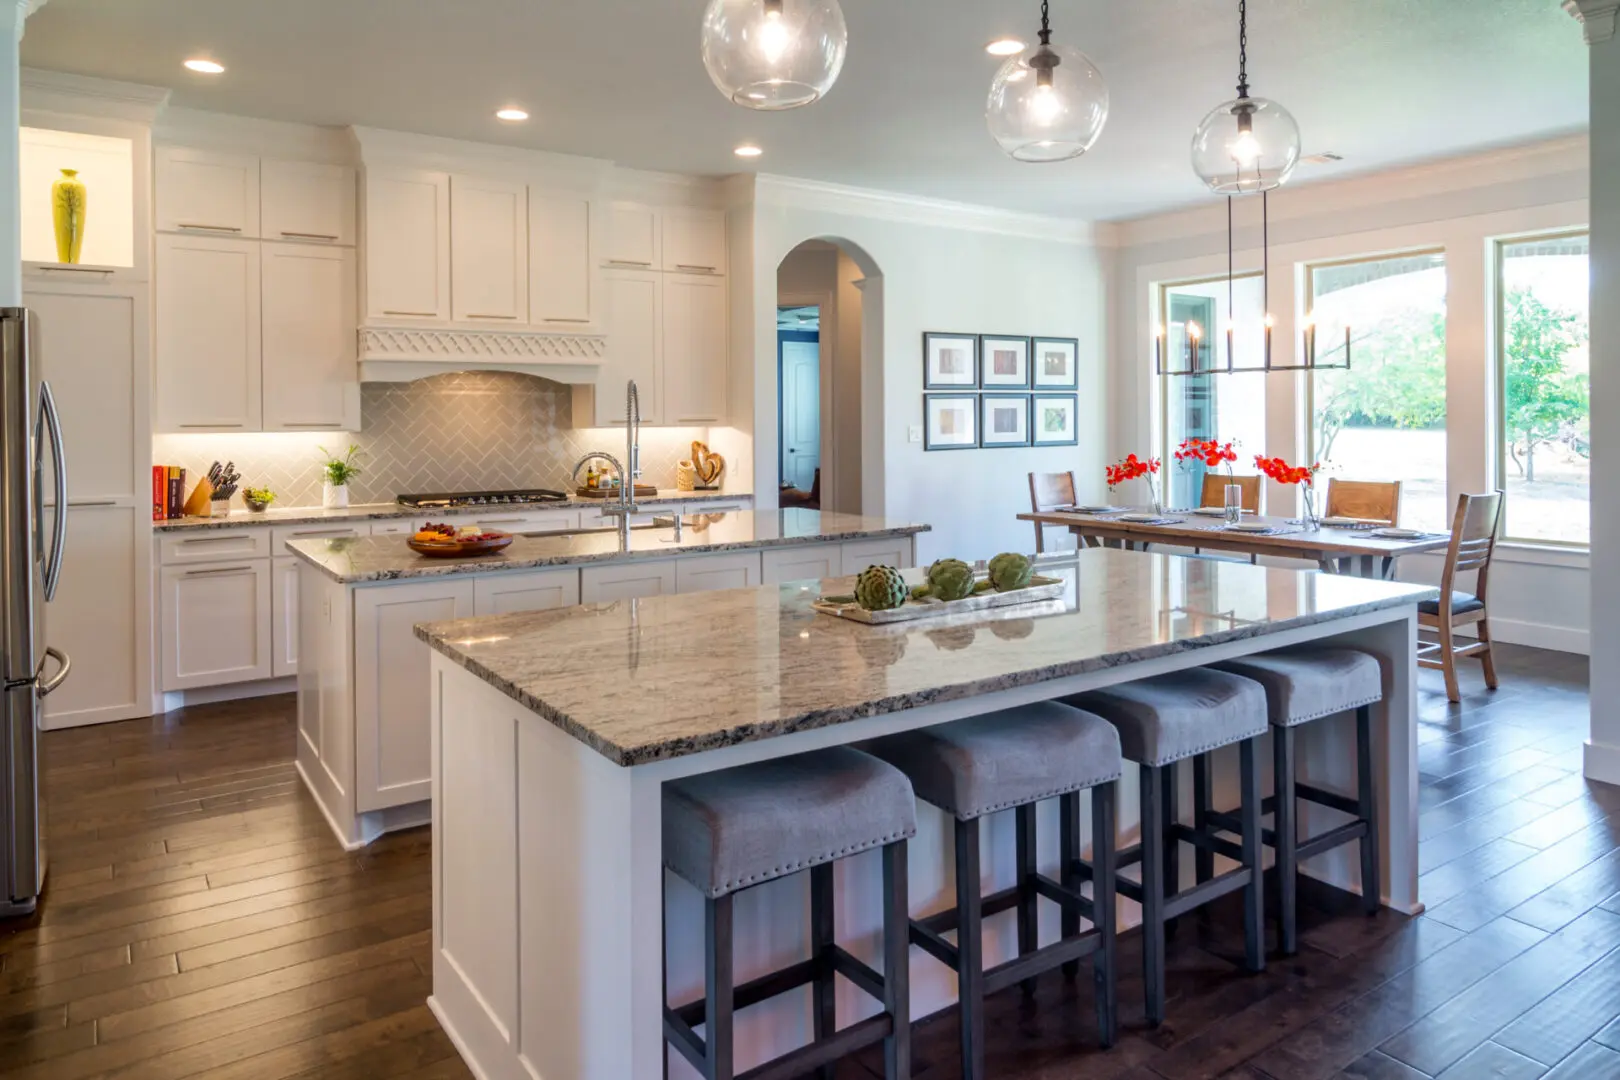 10 Top Must Haves in a Custom Home Design - Couto Homes